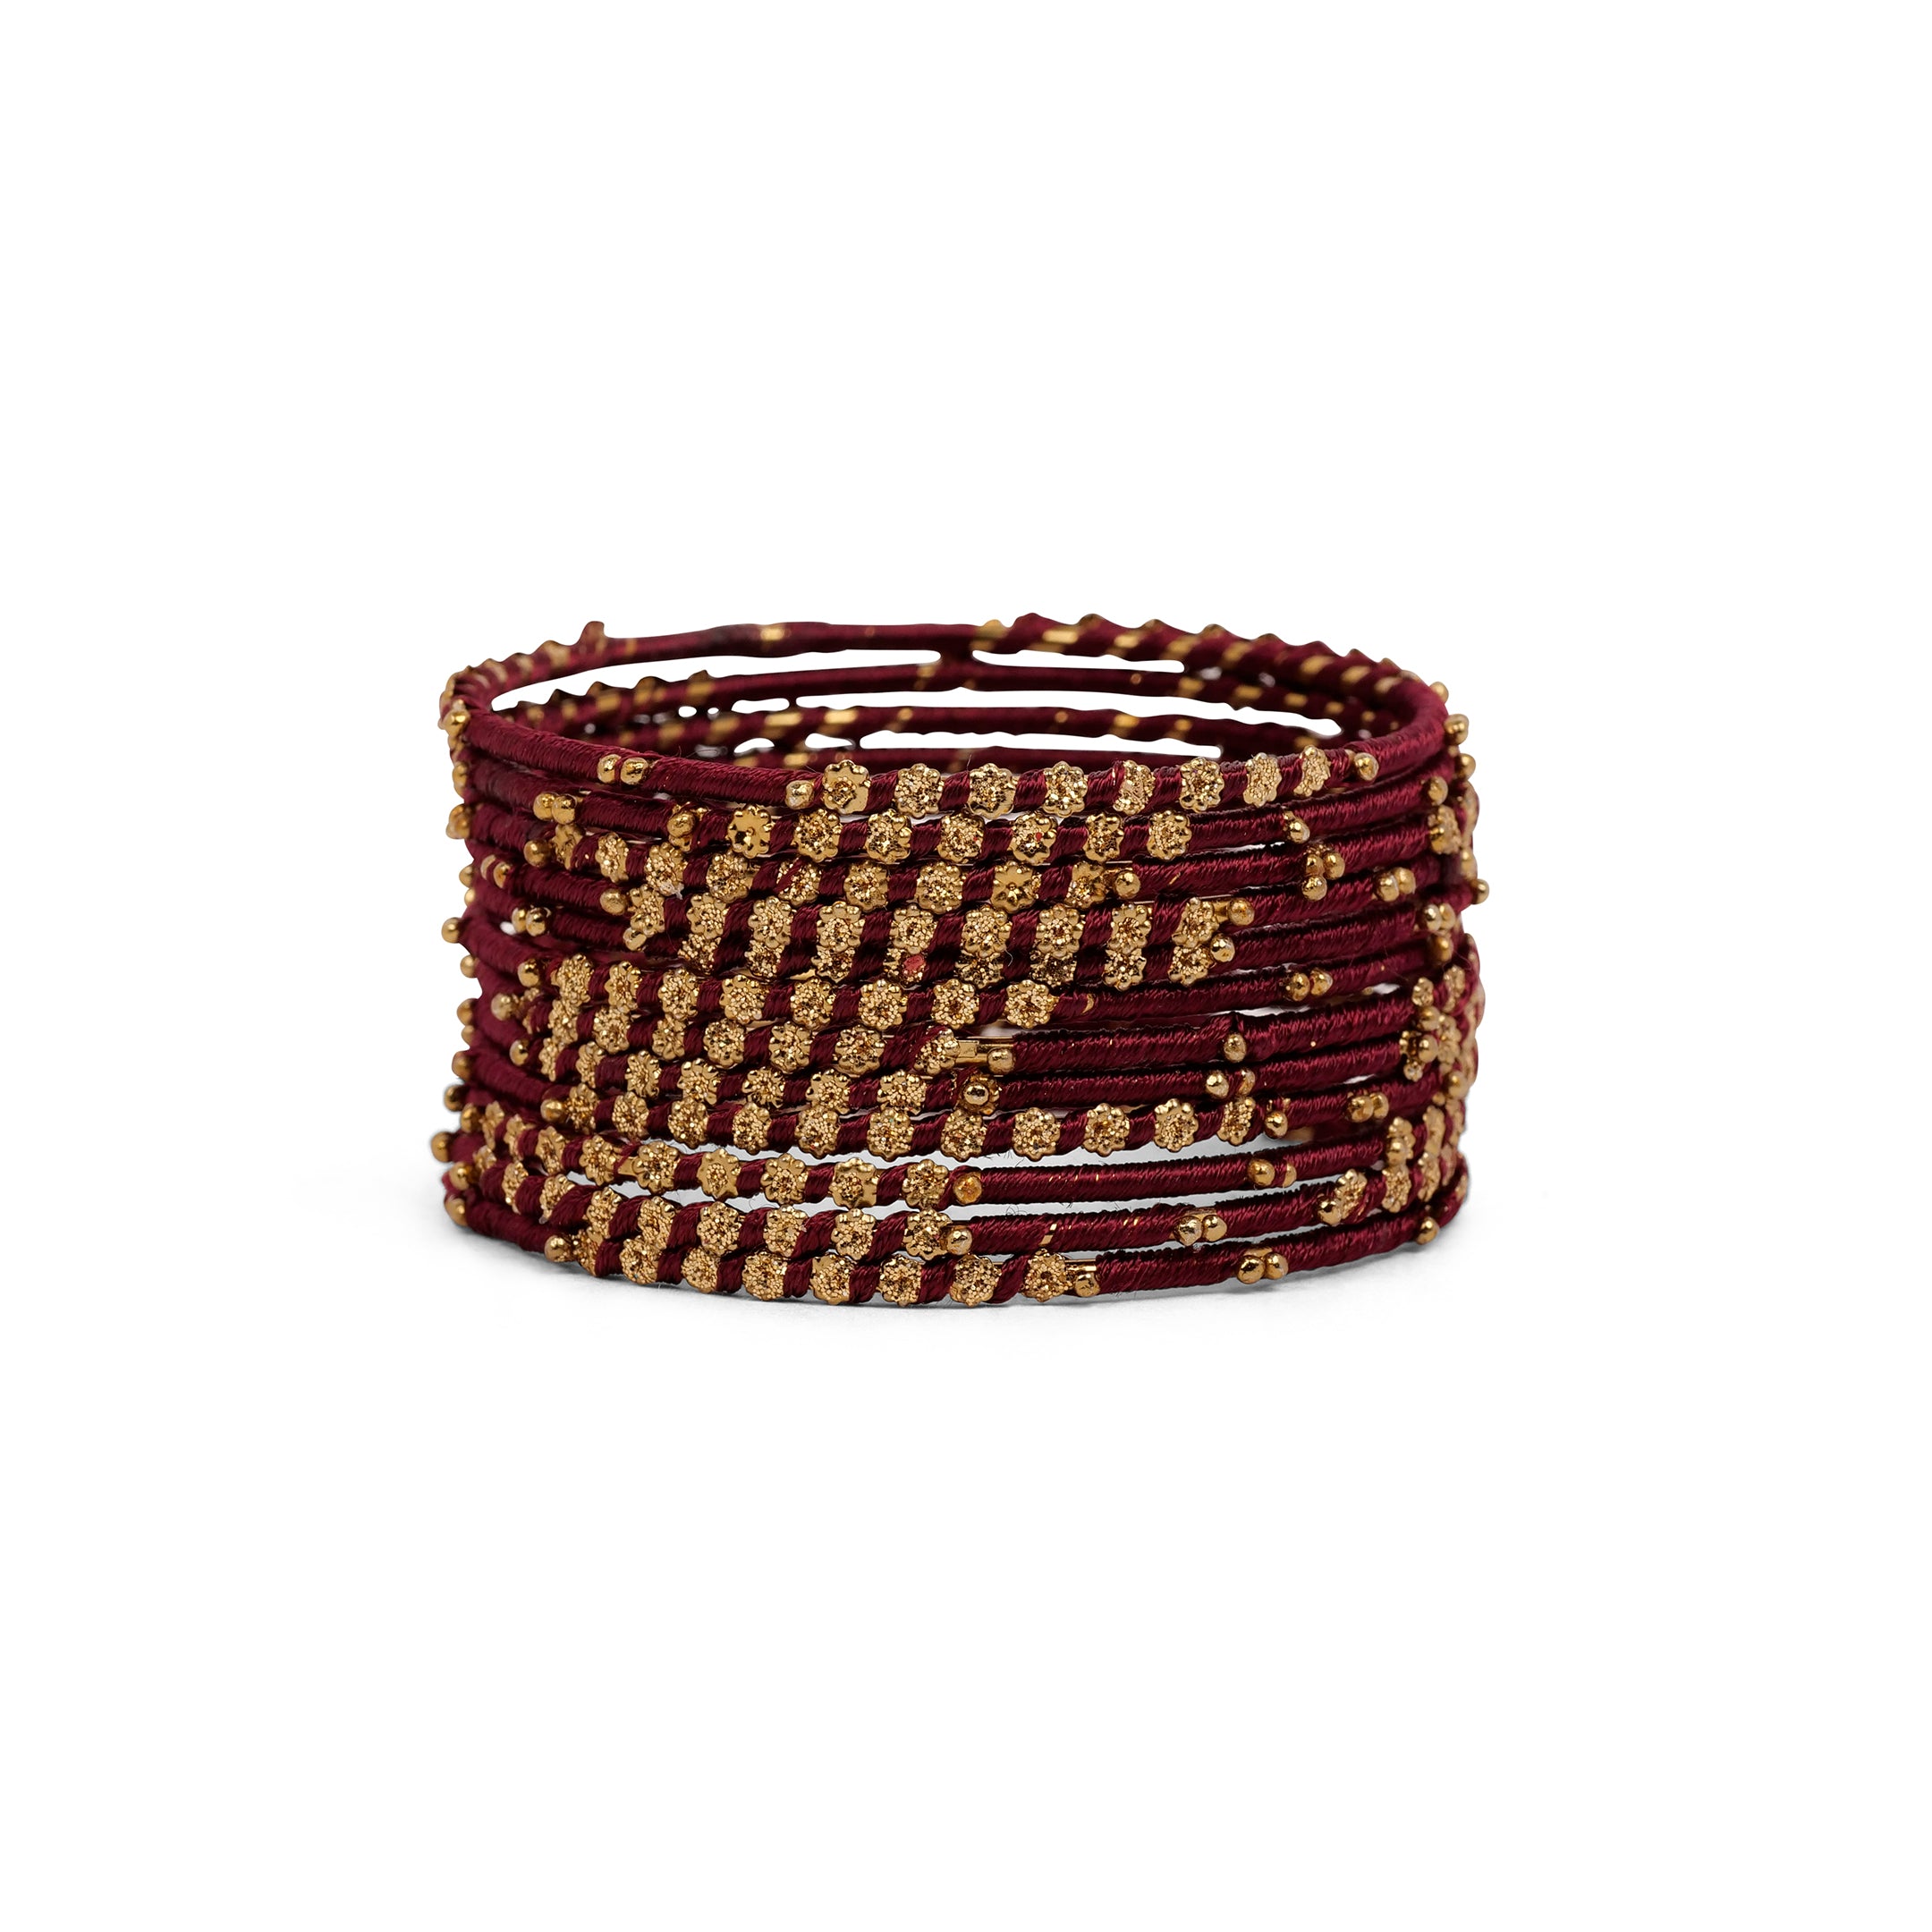 Set of 12 Floral Thead Bangles in Maroon